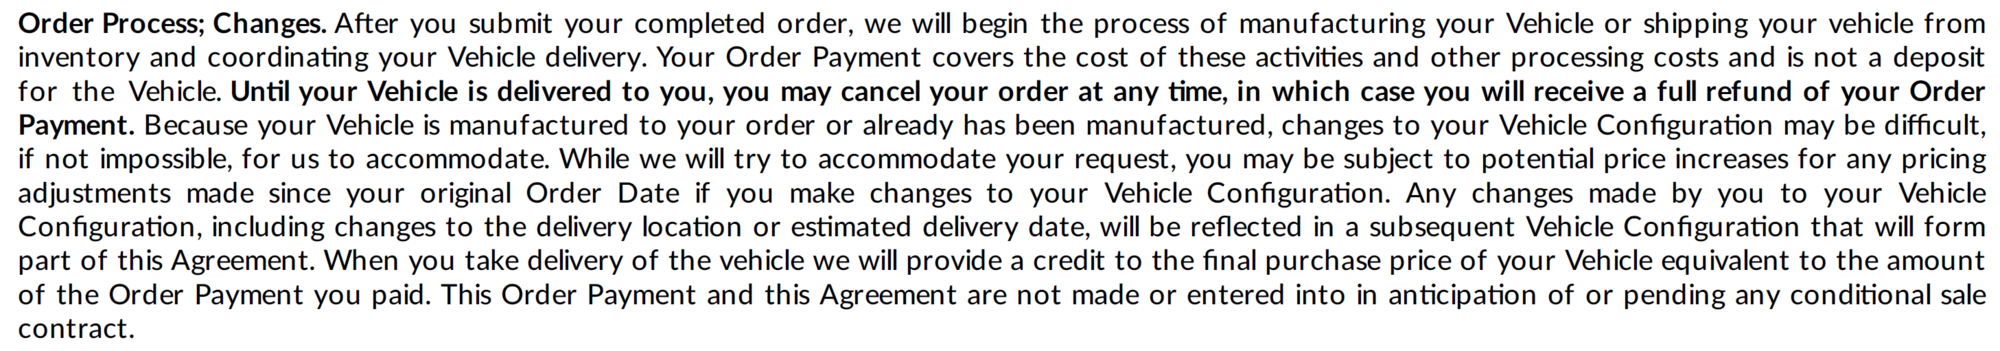 Order Agreement - New.png